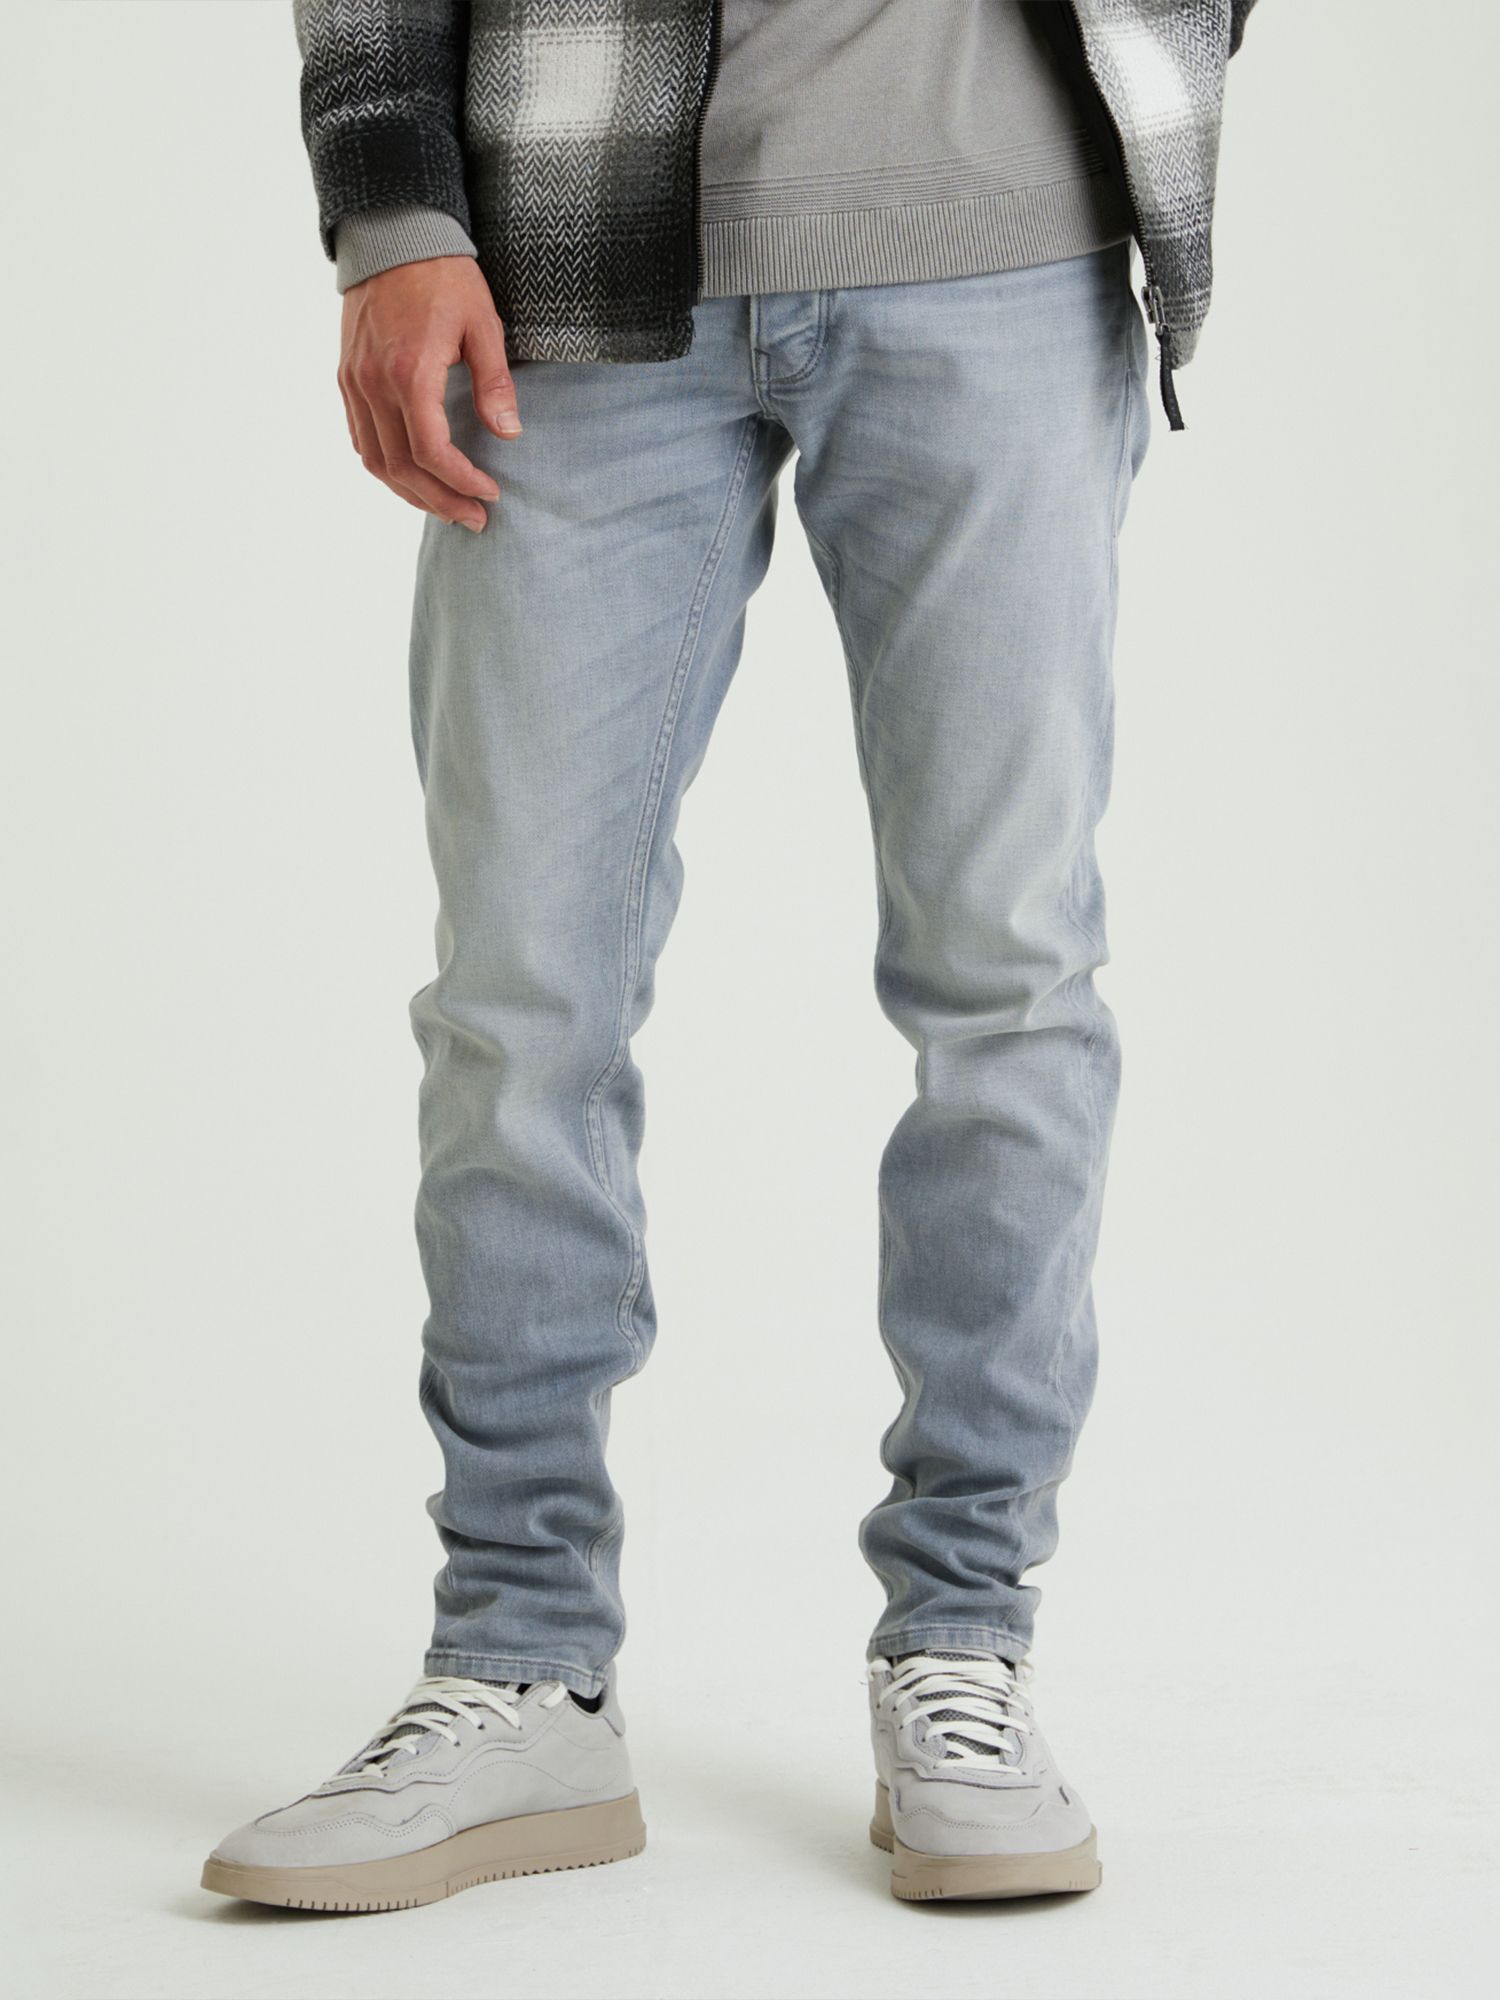 CHASIN' - Jeans & Bottoms | The Official Online Store